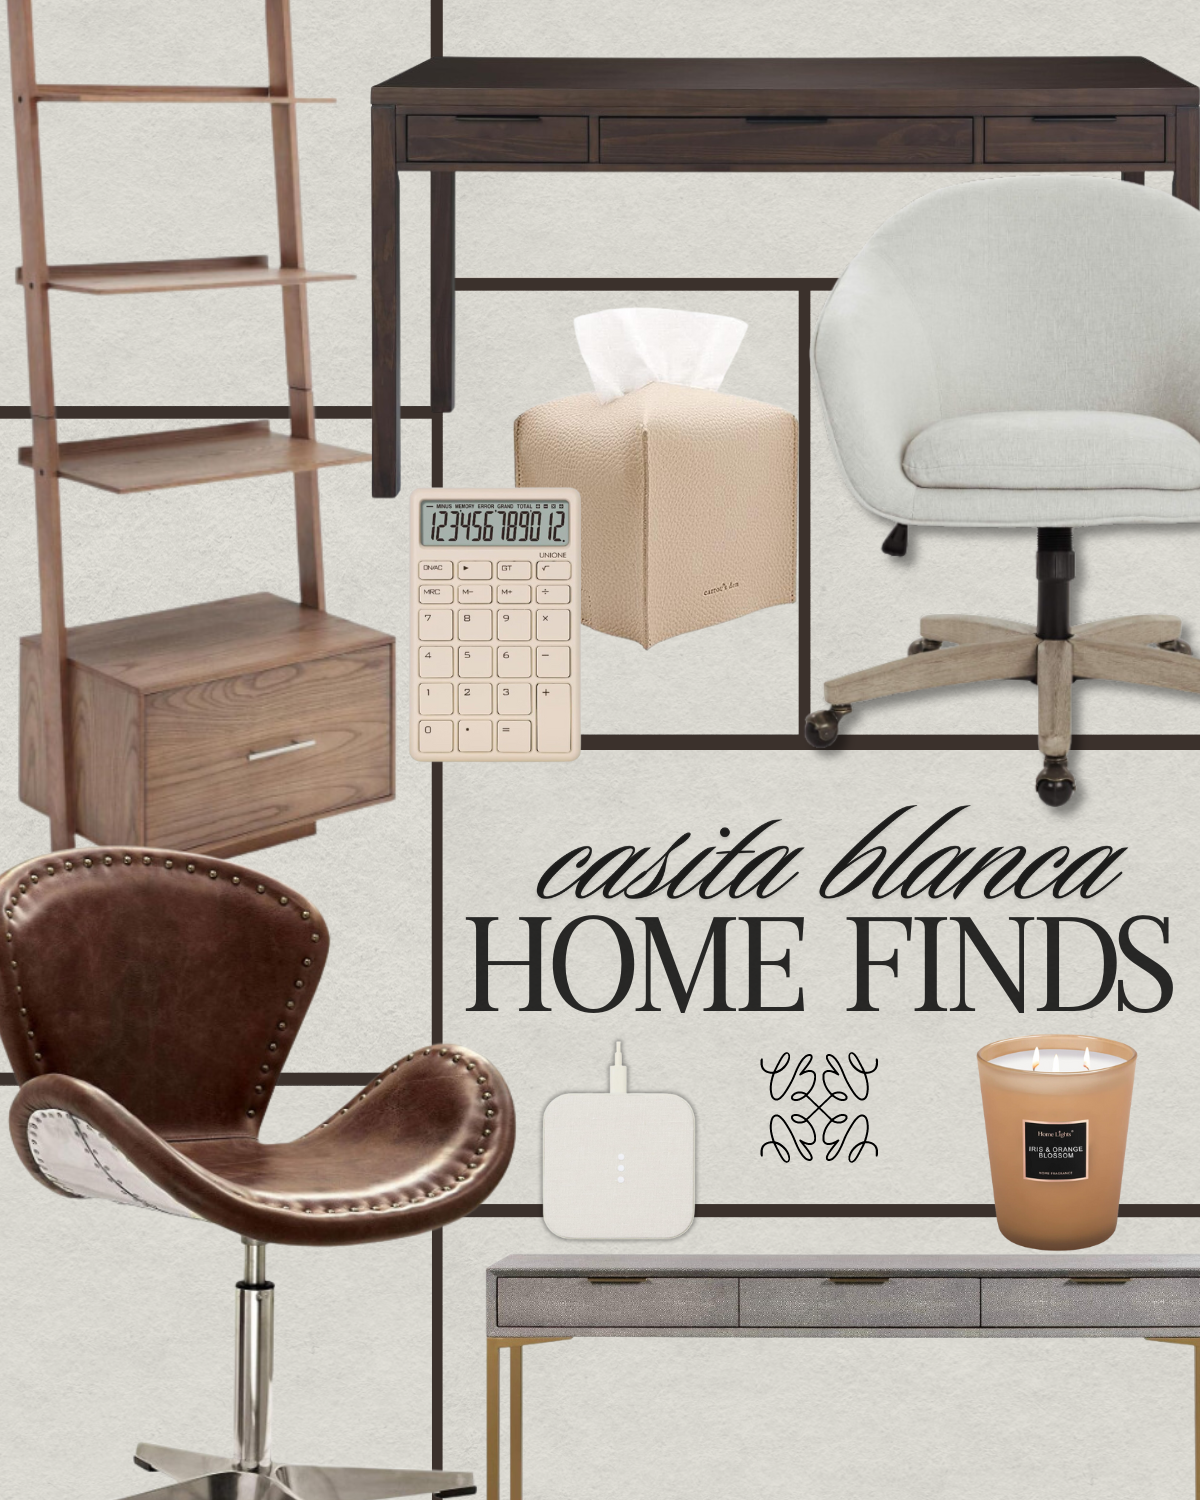 Home Office Styling Tips Home, modern home, home office, work from home, bookshelf, accent chair, office chair, office gadgets